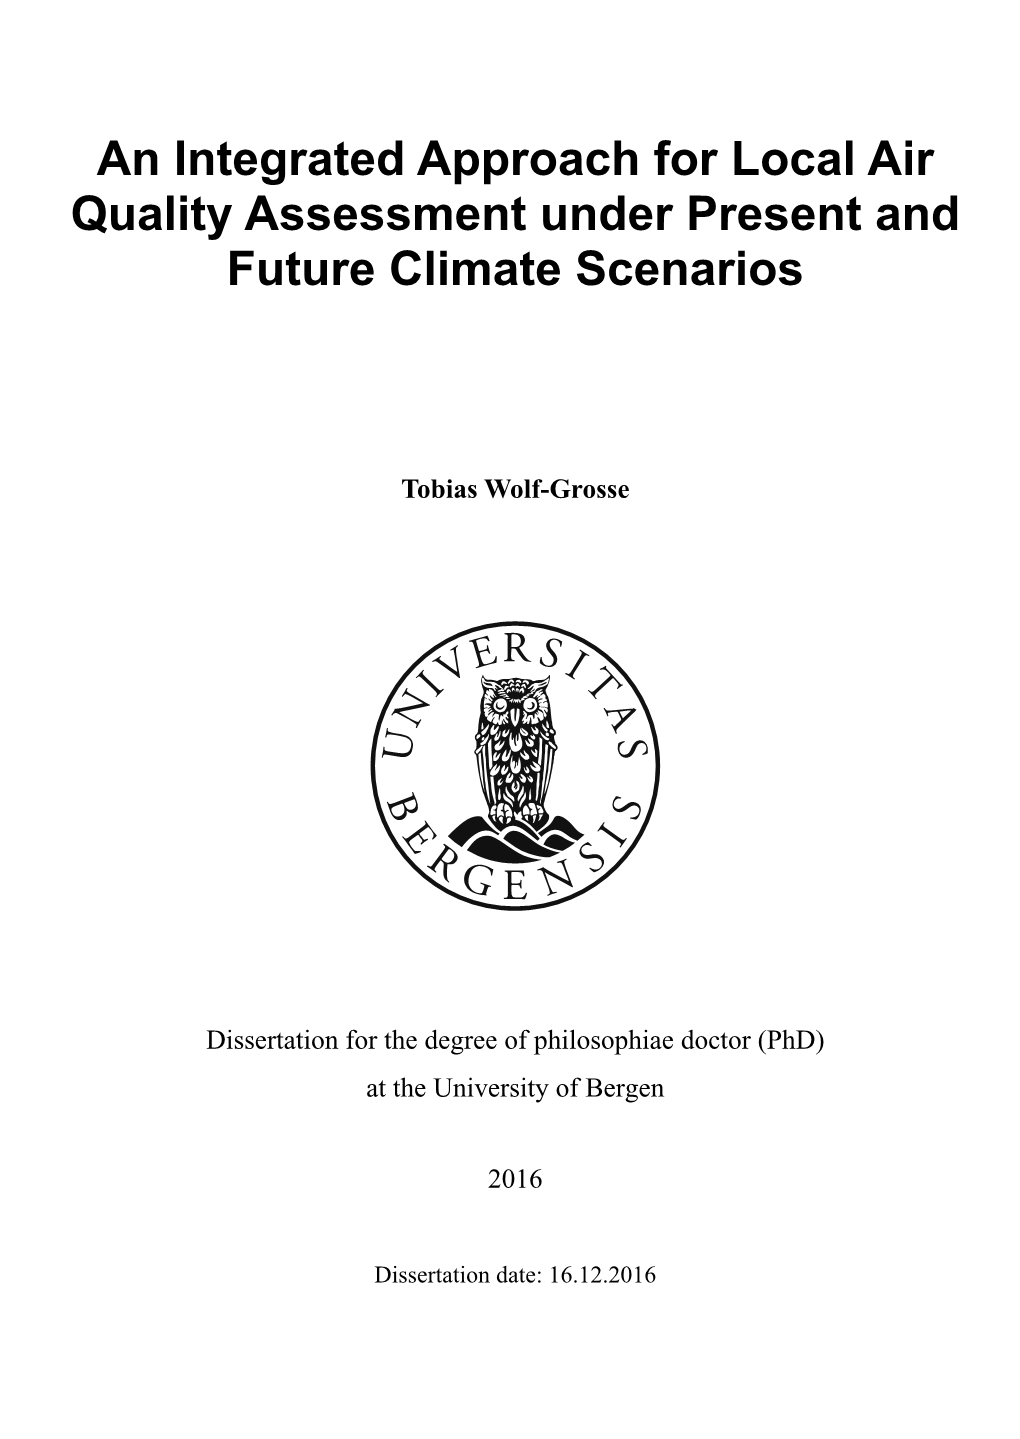 An Integrated Approach for Local Air Quality Assessment Under Present and Future Climate Scenarios